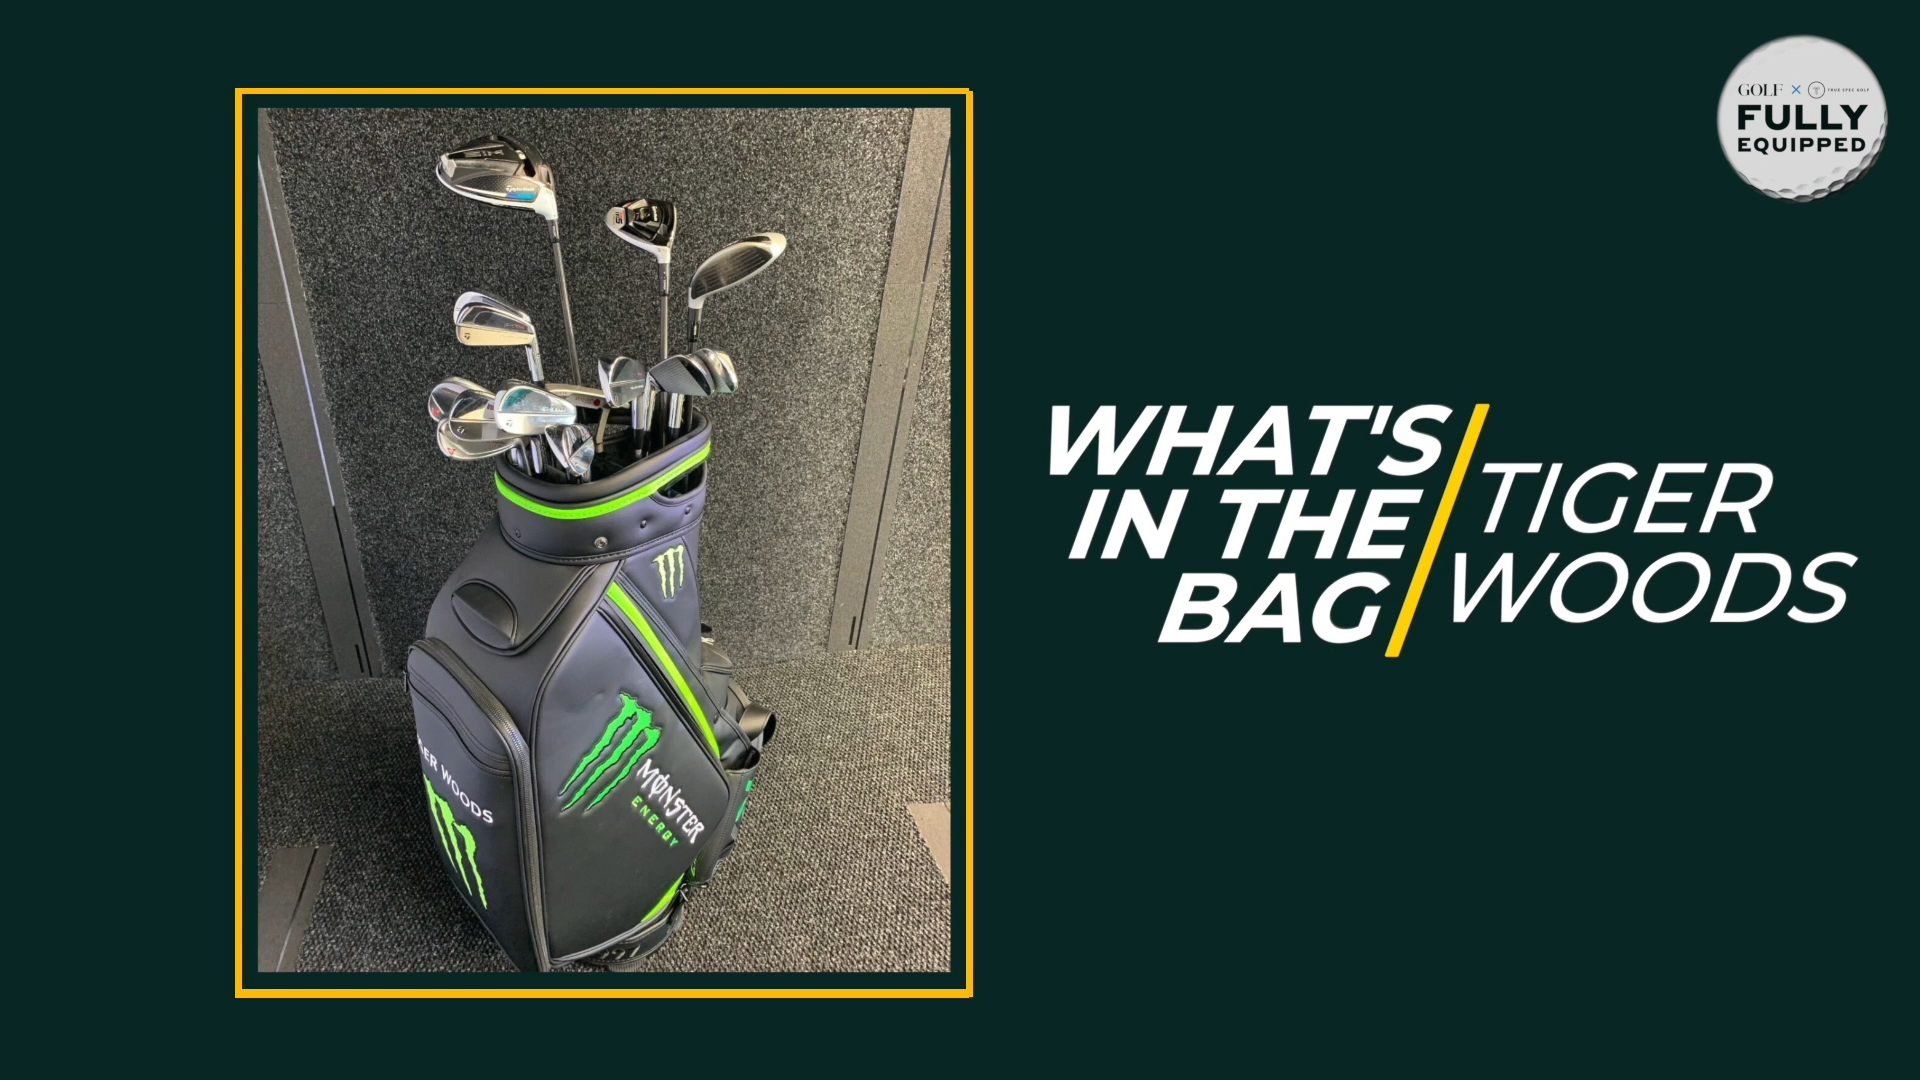 Fully Equipped What's In The Bag Tiger Woods' gear heading into The